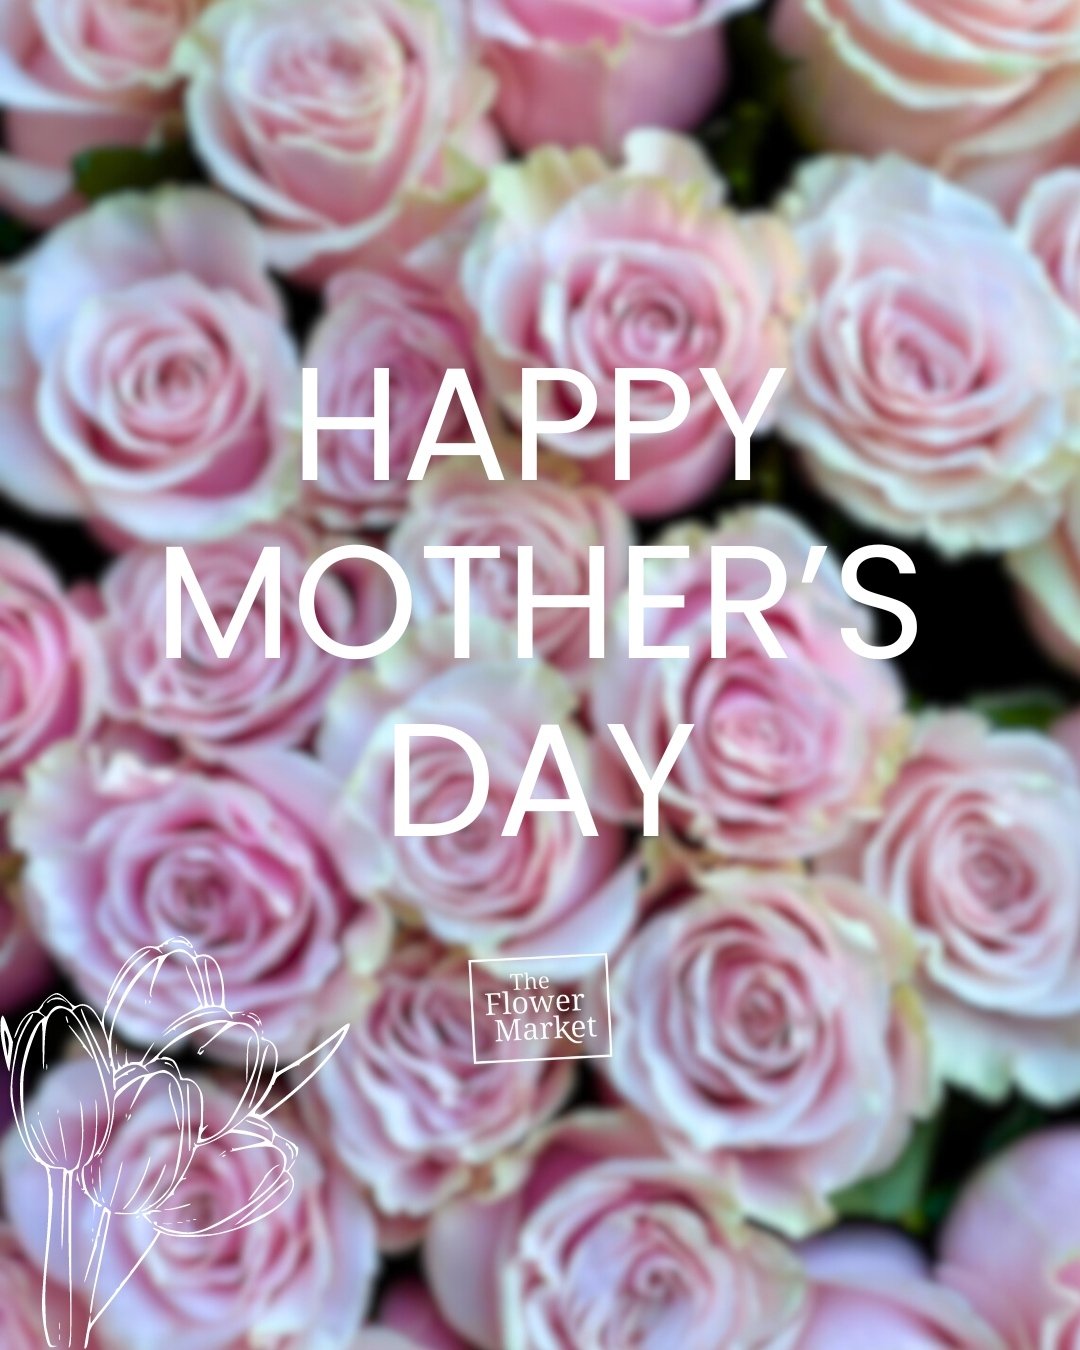 Happy Mother's Day! 🌸

To all the amazing mums who support us, enjoy your special day! 💗

For those who have left it a little late, head in store to grab a bunch! 💐

We are open 7am-8pm today! 

#farmersmarket #giftshopping #shoppinglover #Churchl